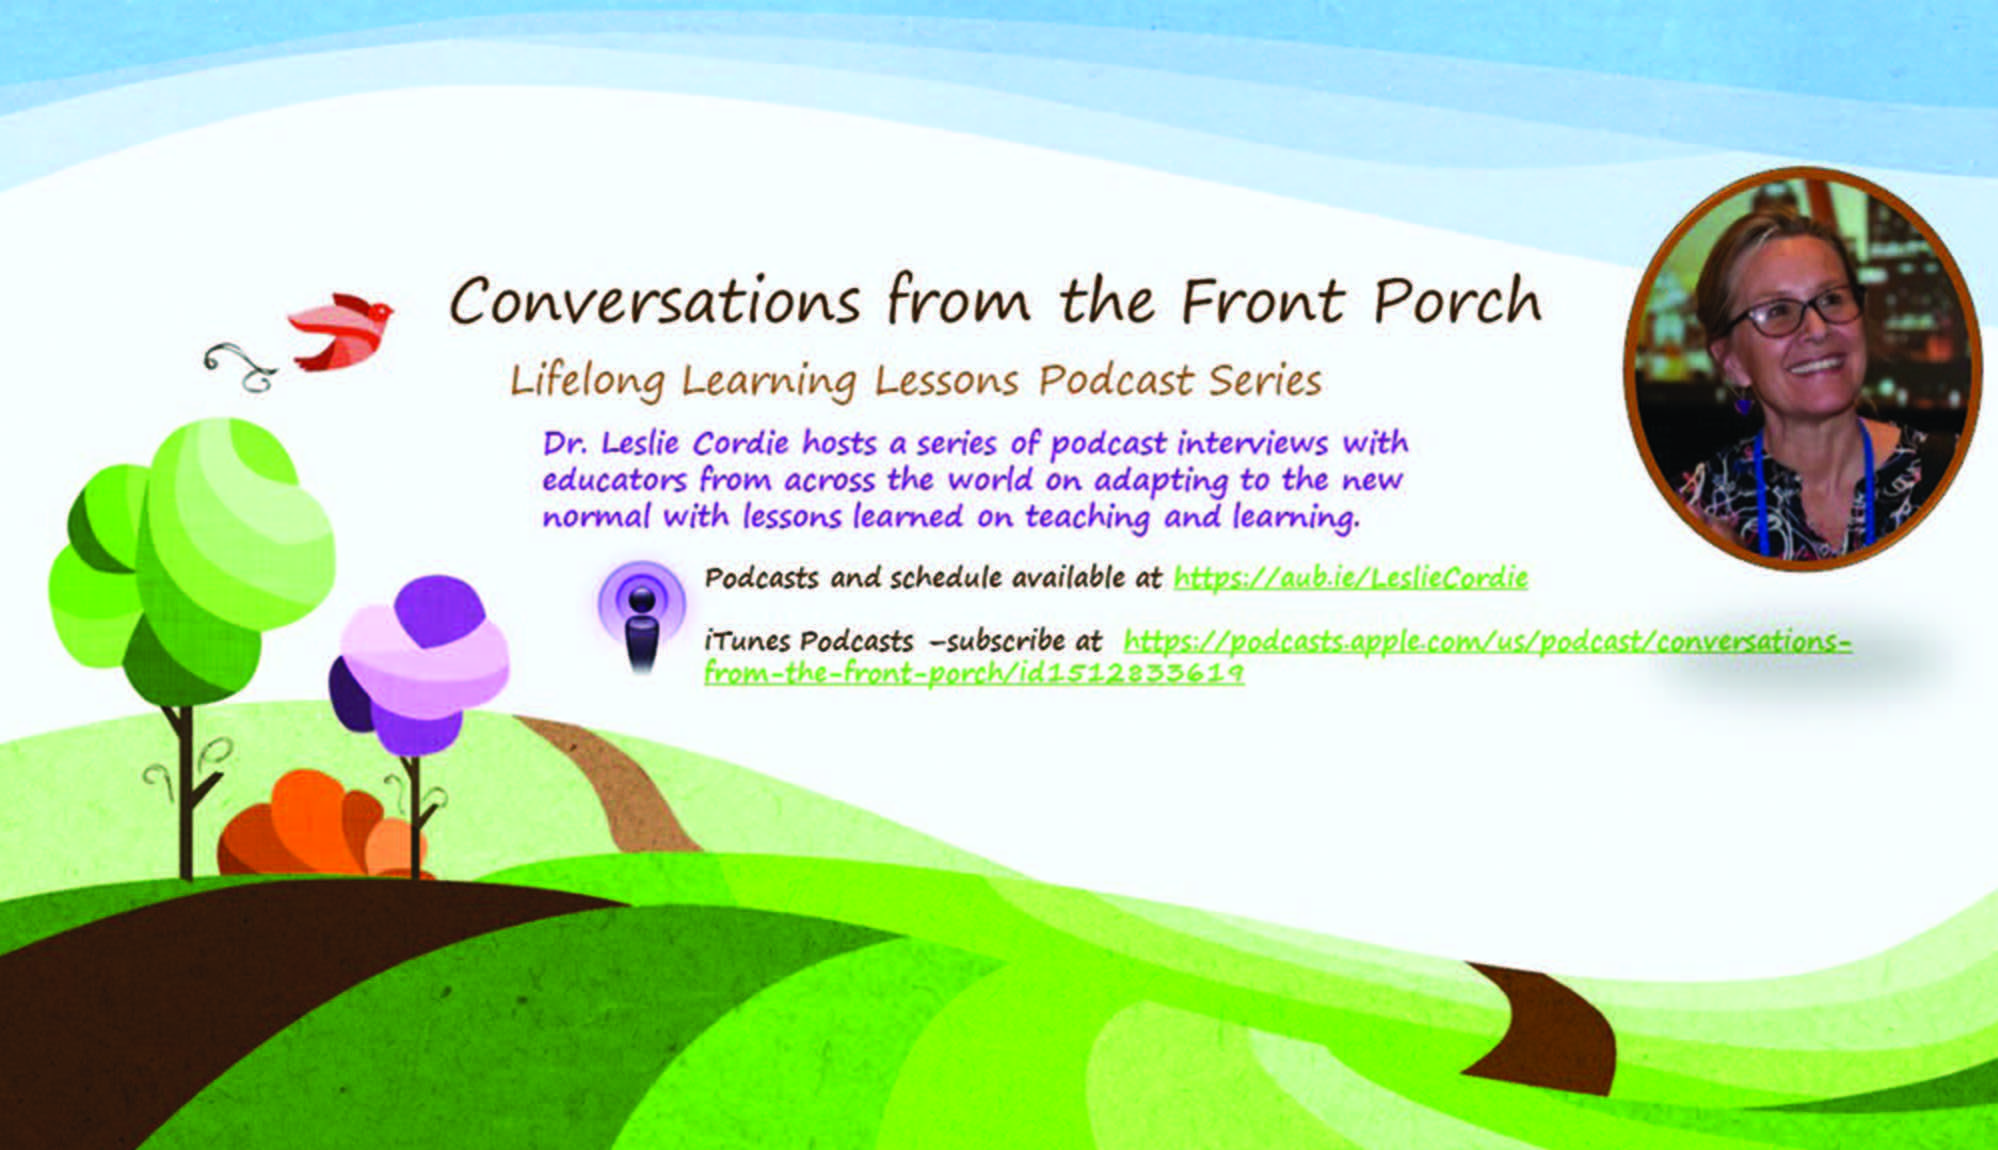 Conversations from the front porch - slide from powerpoint